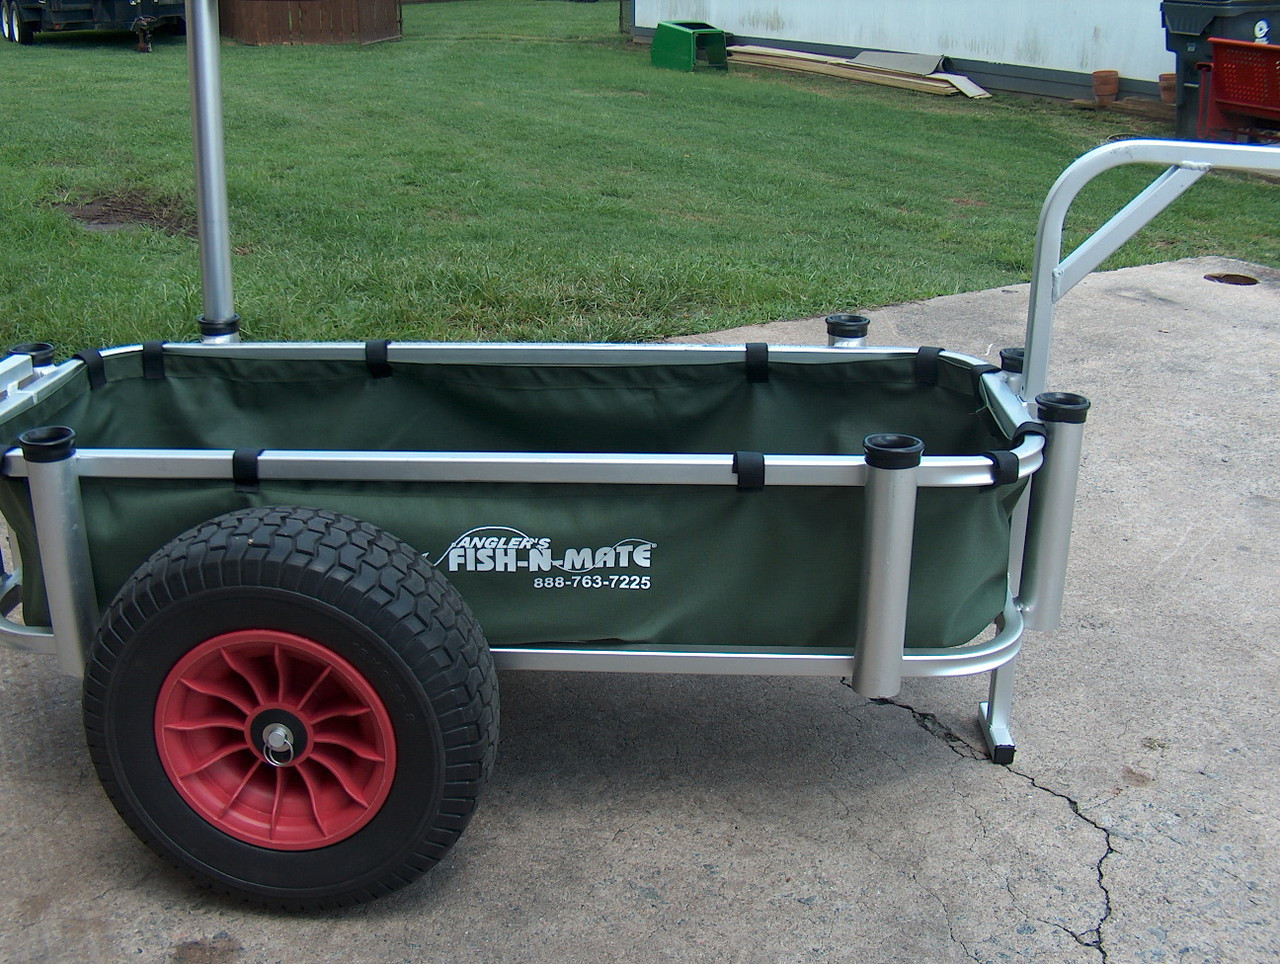 Large Green Cart Liner - Angler's Fish-N-Mate Store Fish N Mate Cart Caddy Fits 2 Receiver Hitch